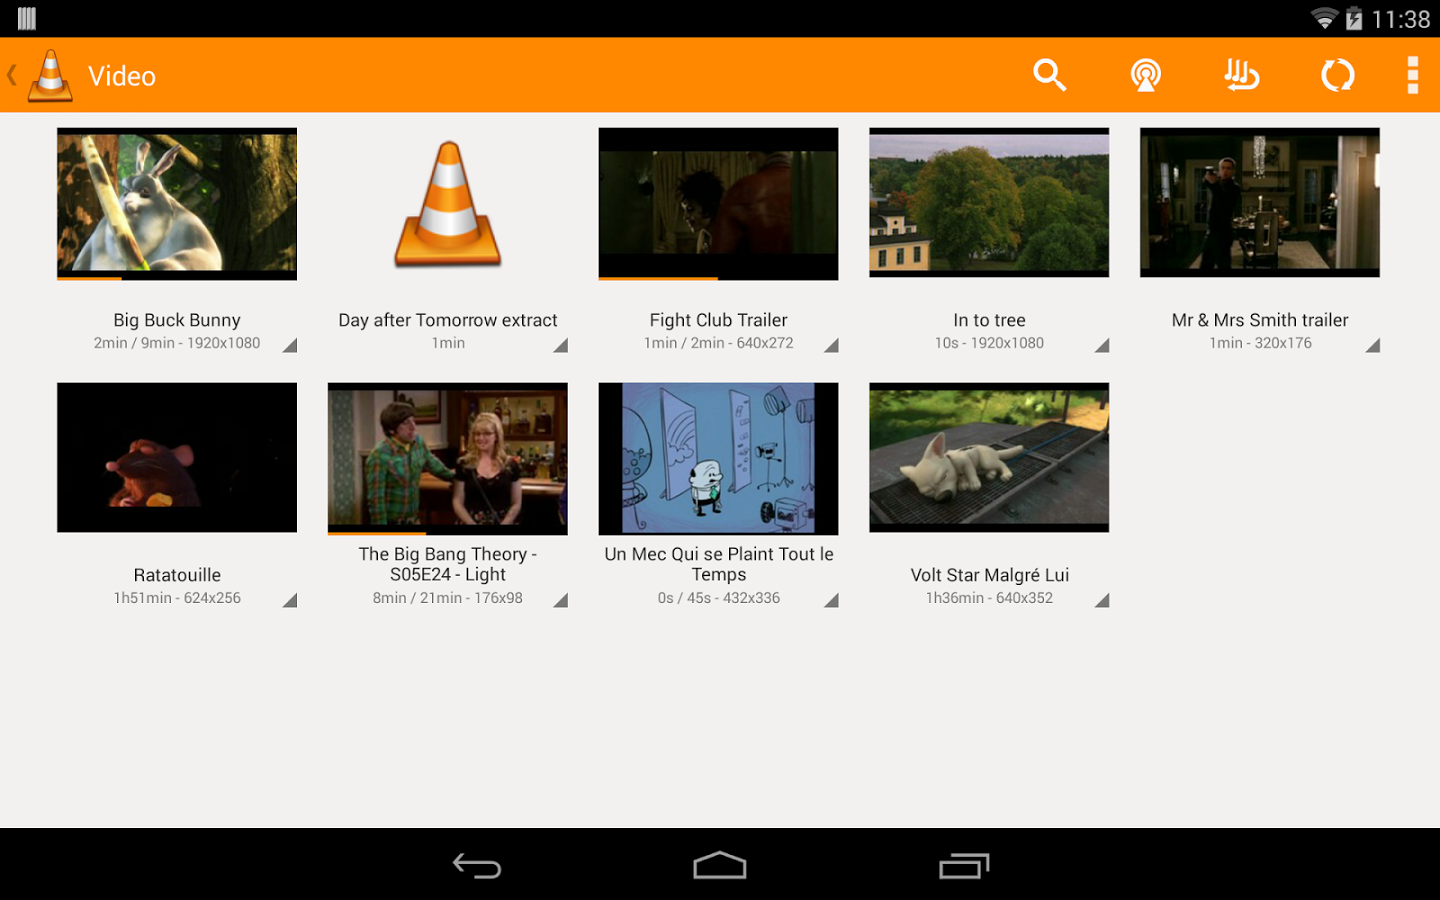 what are the many problems with new vesrion of vlc media player 3.0.0